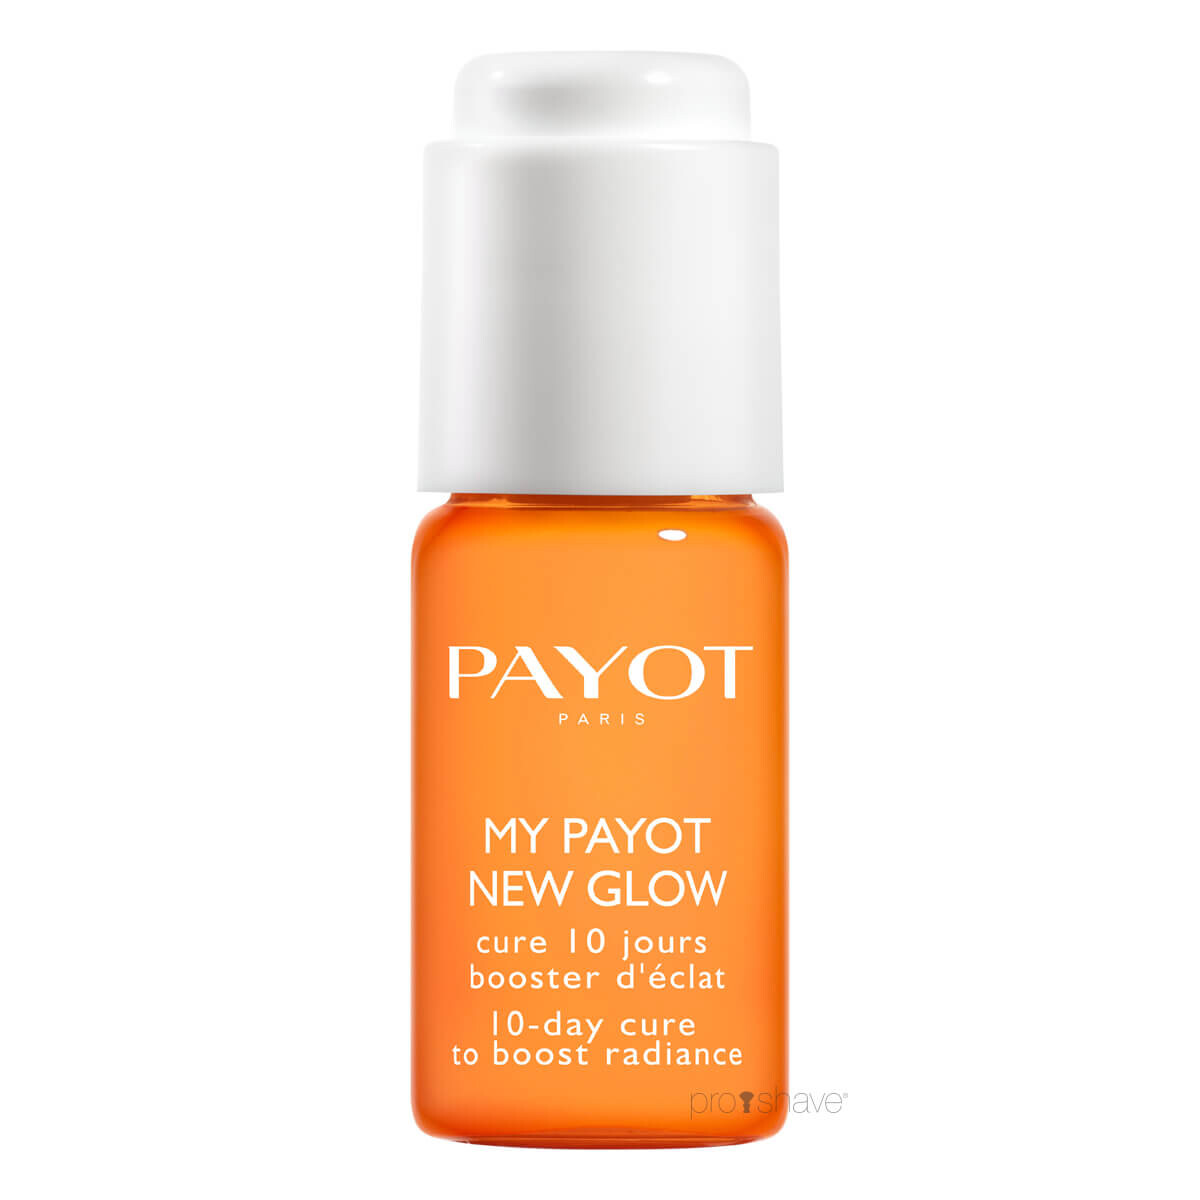 Billede af Payot My Payot New Glow 10 Days Cure, 7 ml.